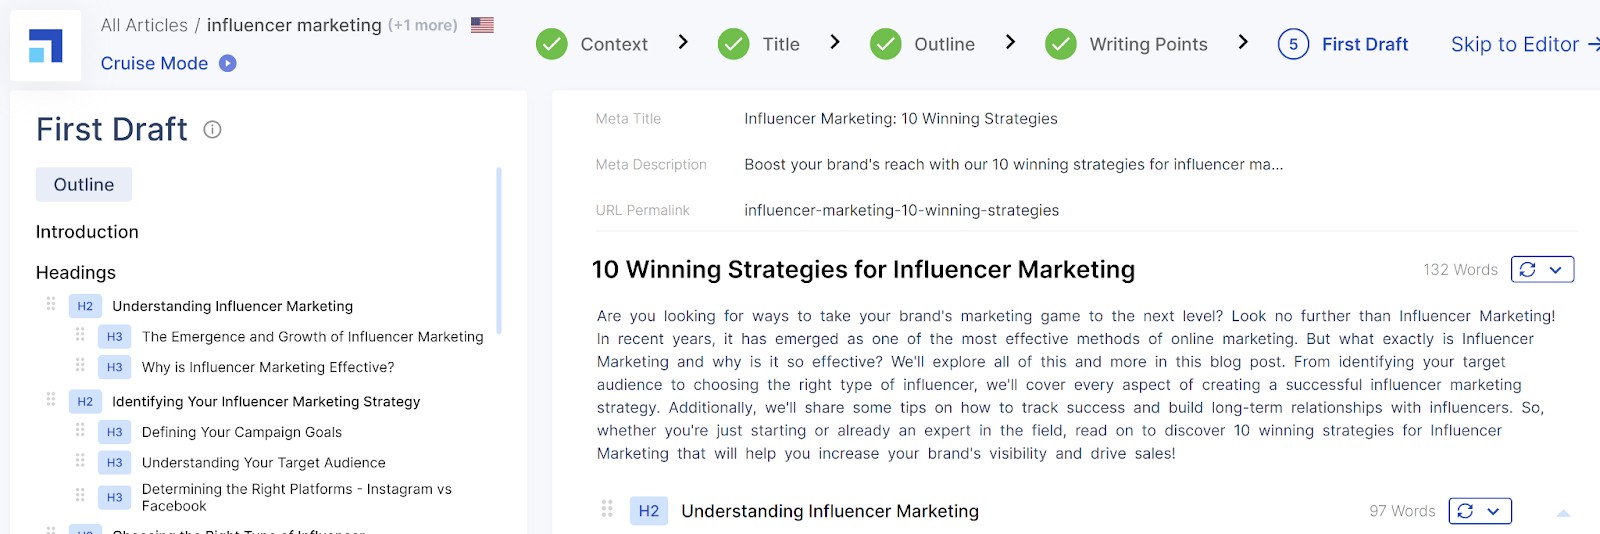 Scalenut's draft reads "10 Winning Strategies for Influencer Marketing: Are you looking for ways to take your brand's marketing game to the next level? Look no further than Influencer Marketing! In recent years, it has emerged as one of the most effective methods of online marketing. But what exactly is Influencer Marketing and why is it so effective? We'll explore all of this and more in this blog post. From identifying your target audience to choosing the right type of influencer, we'll cover every aspect of creating a successful influencer marketing strategy. Additionally, we'll share some tips on how to track success and build long-term relationships with influencers. So, whether you're just starting or already an expert in the field, read on to discover 10 winning strategies for Influencer Marketing that will help you increase your brand's visibility and drive sales!"; AI Copywriting tools